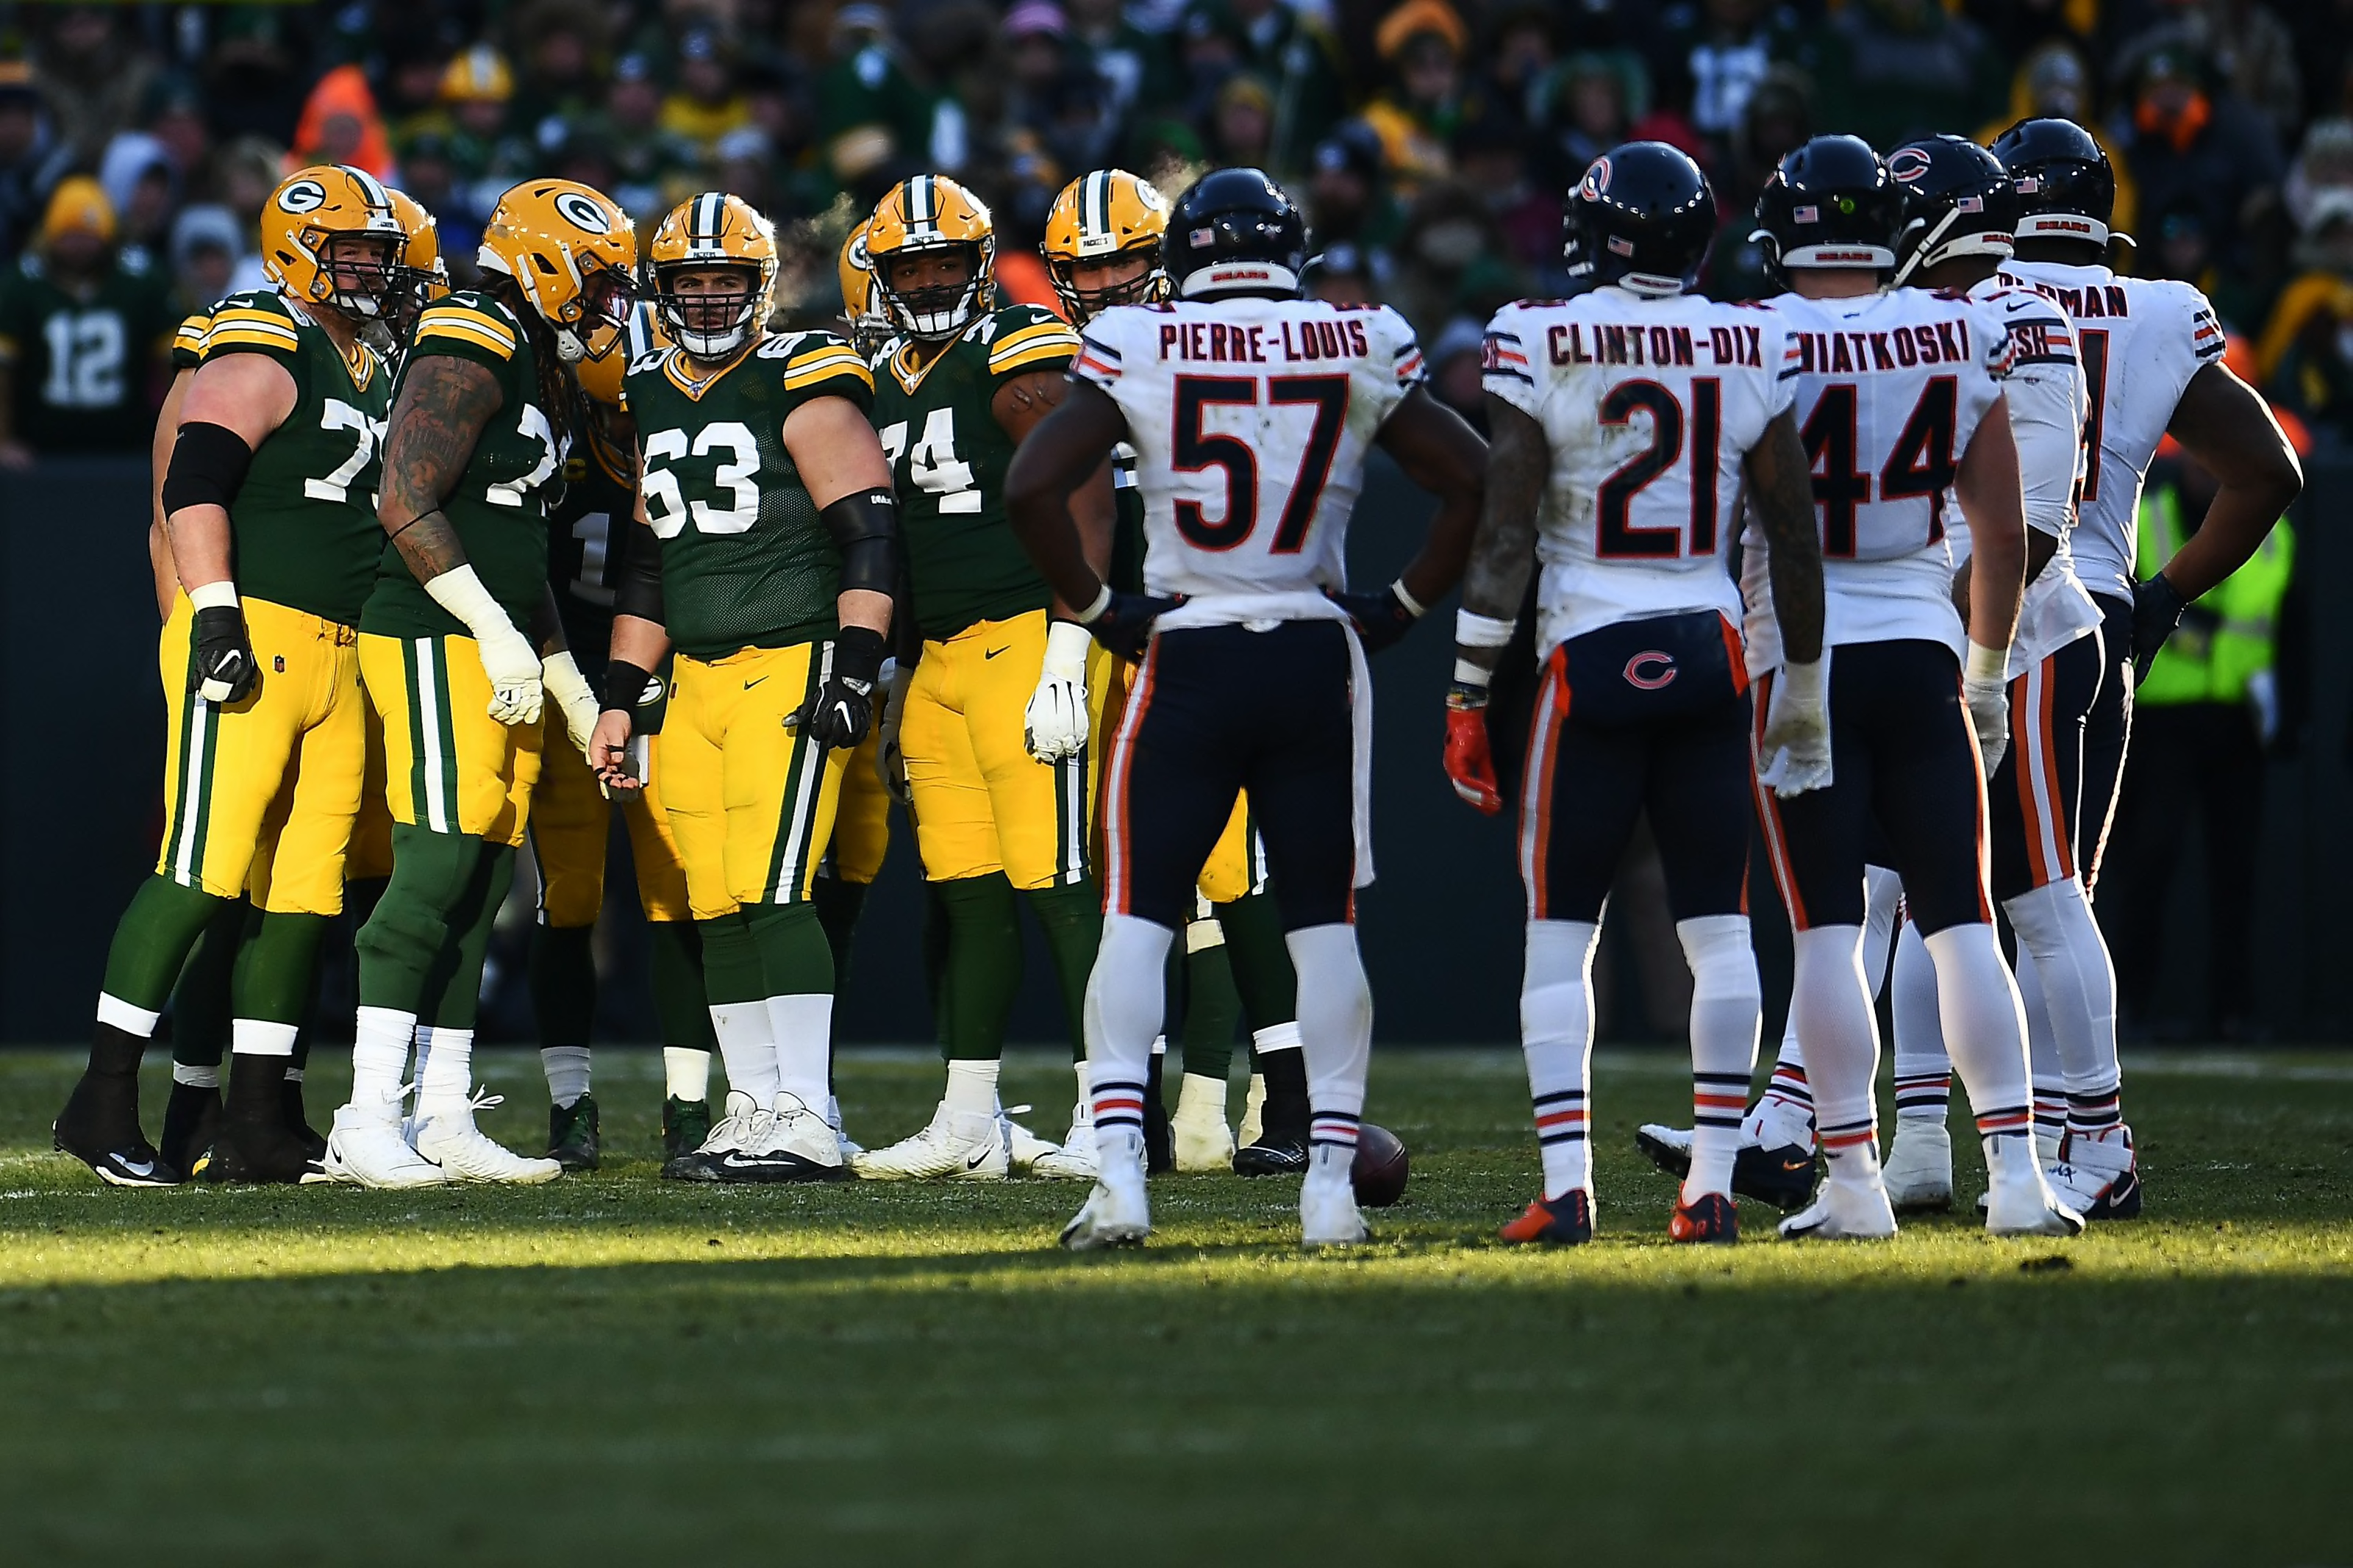 Chicago Bears Previewing the vital, mustwin game vs the Packers